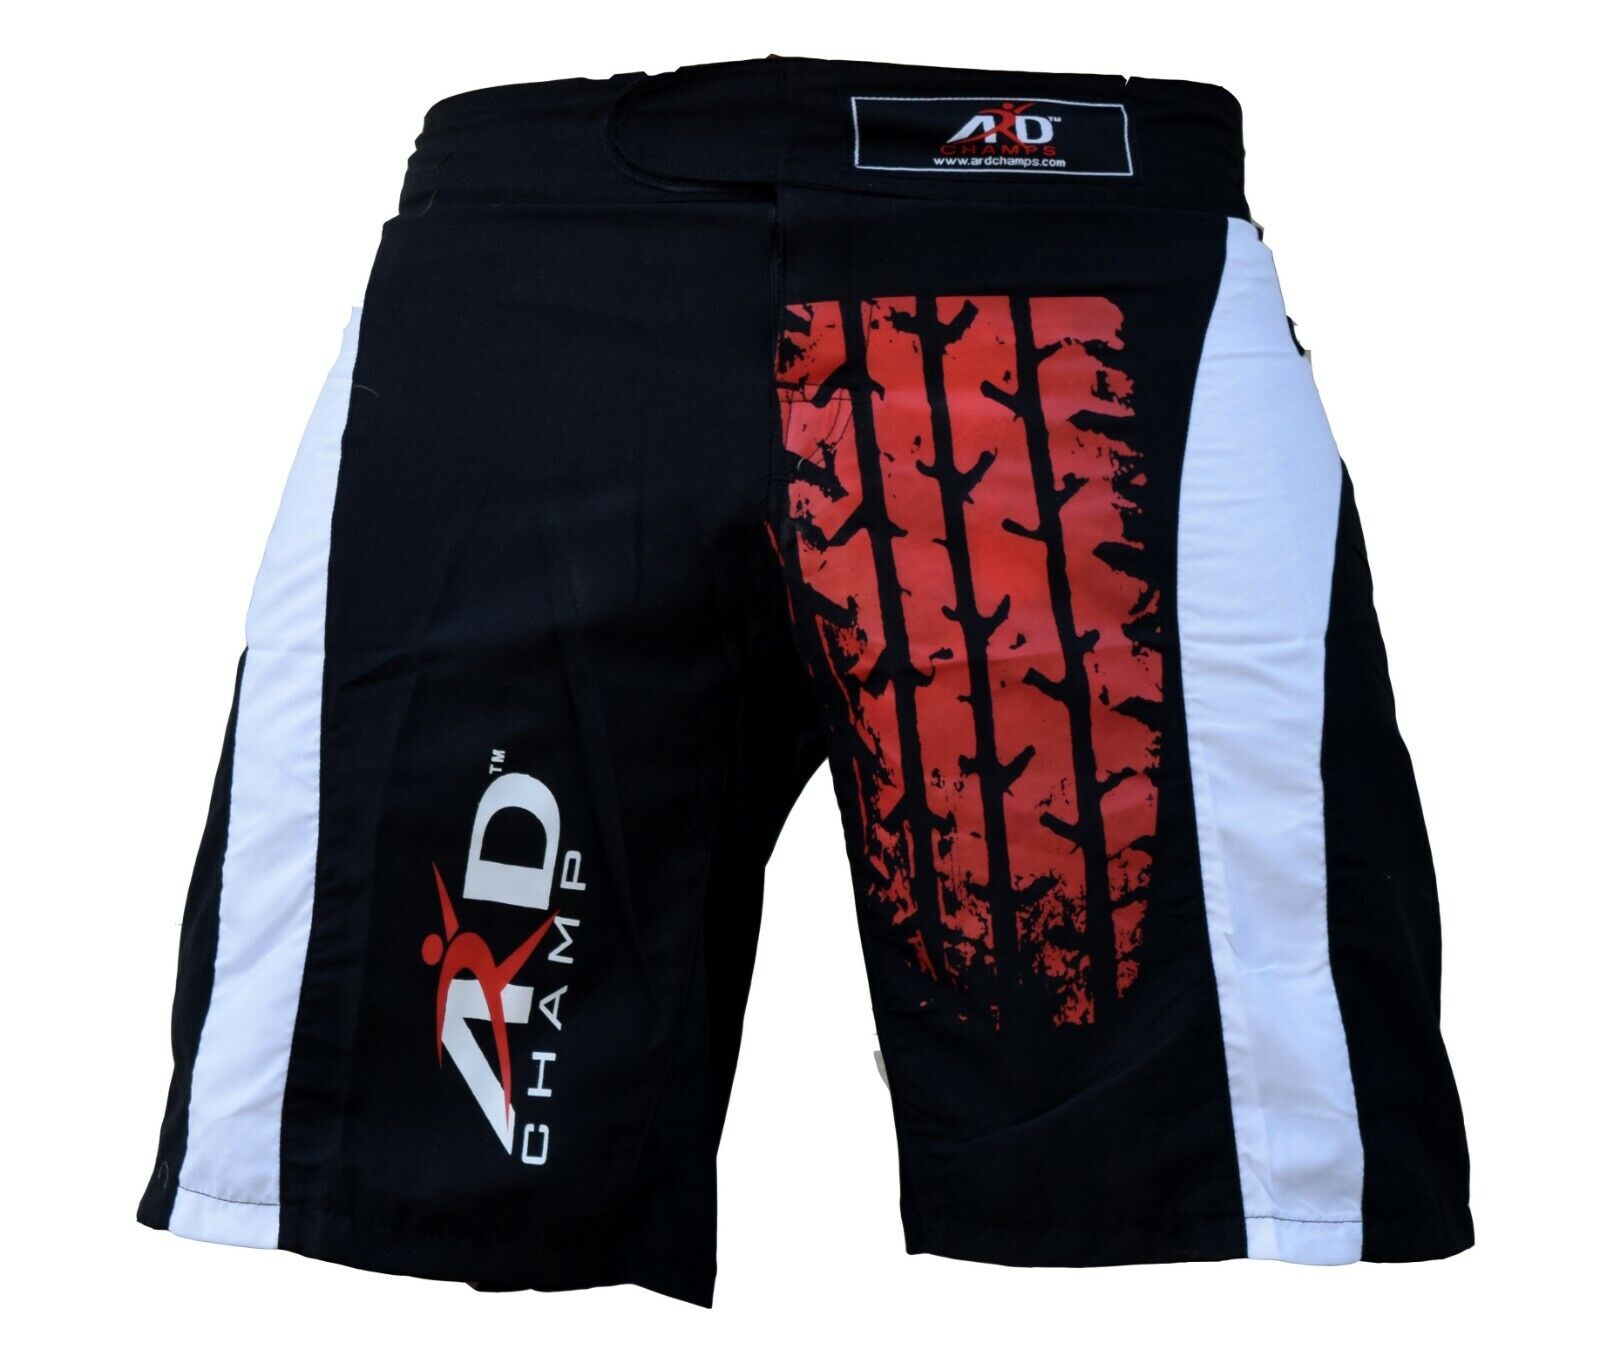 ARD CHAMPS™ Pro MMA Fight Shorts UFC Cage Fight Grappling Muay